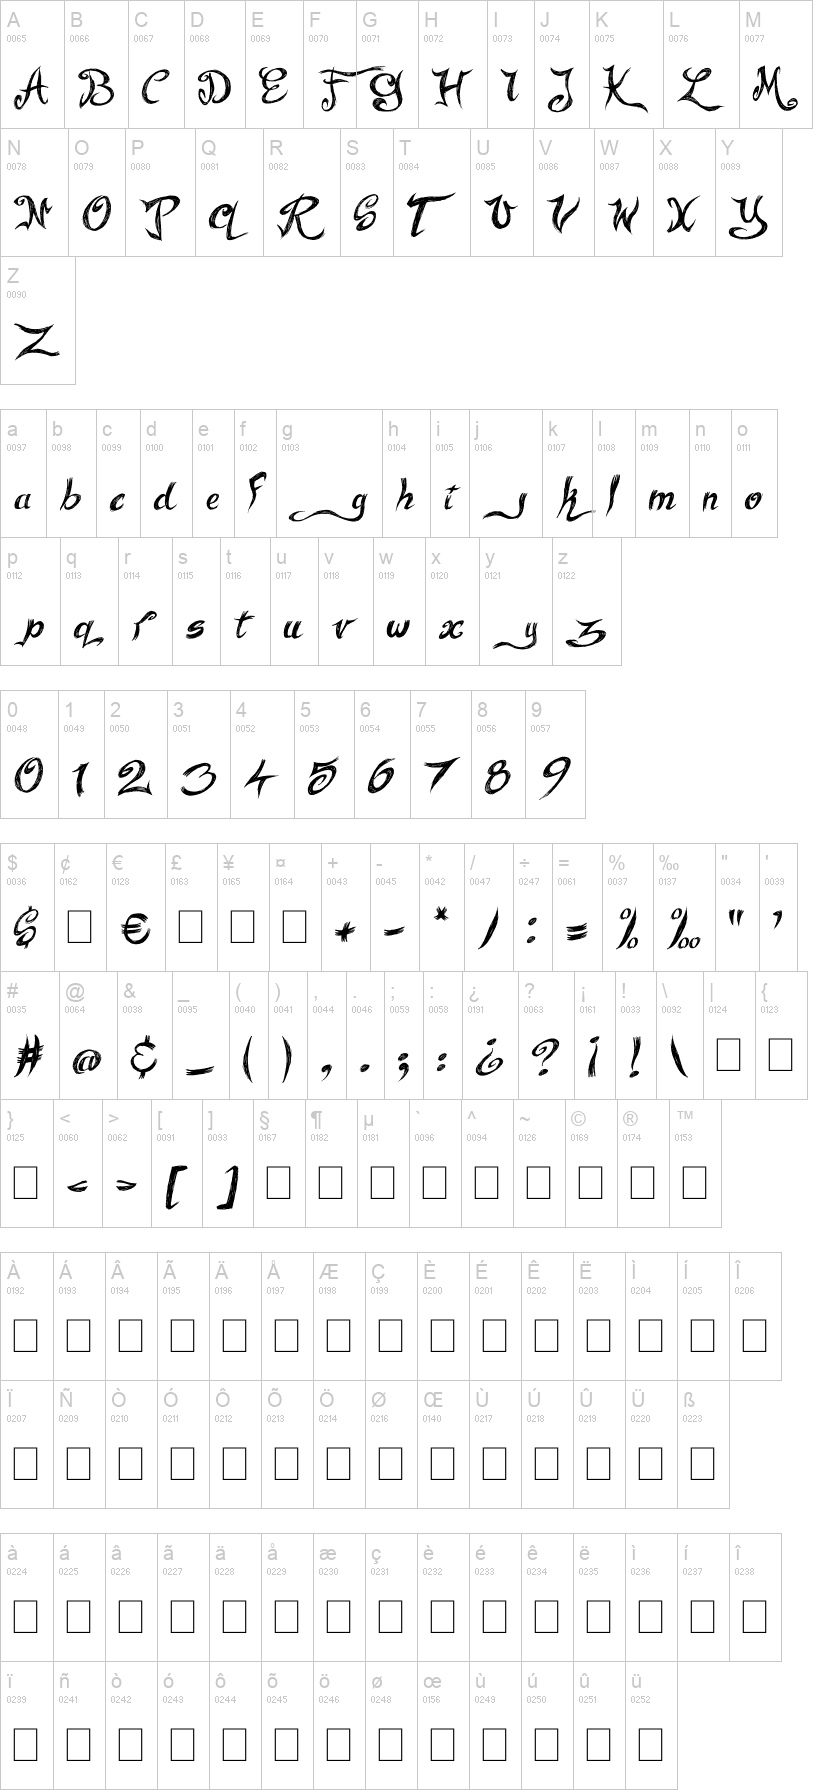 the word music in strange font